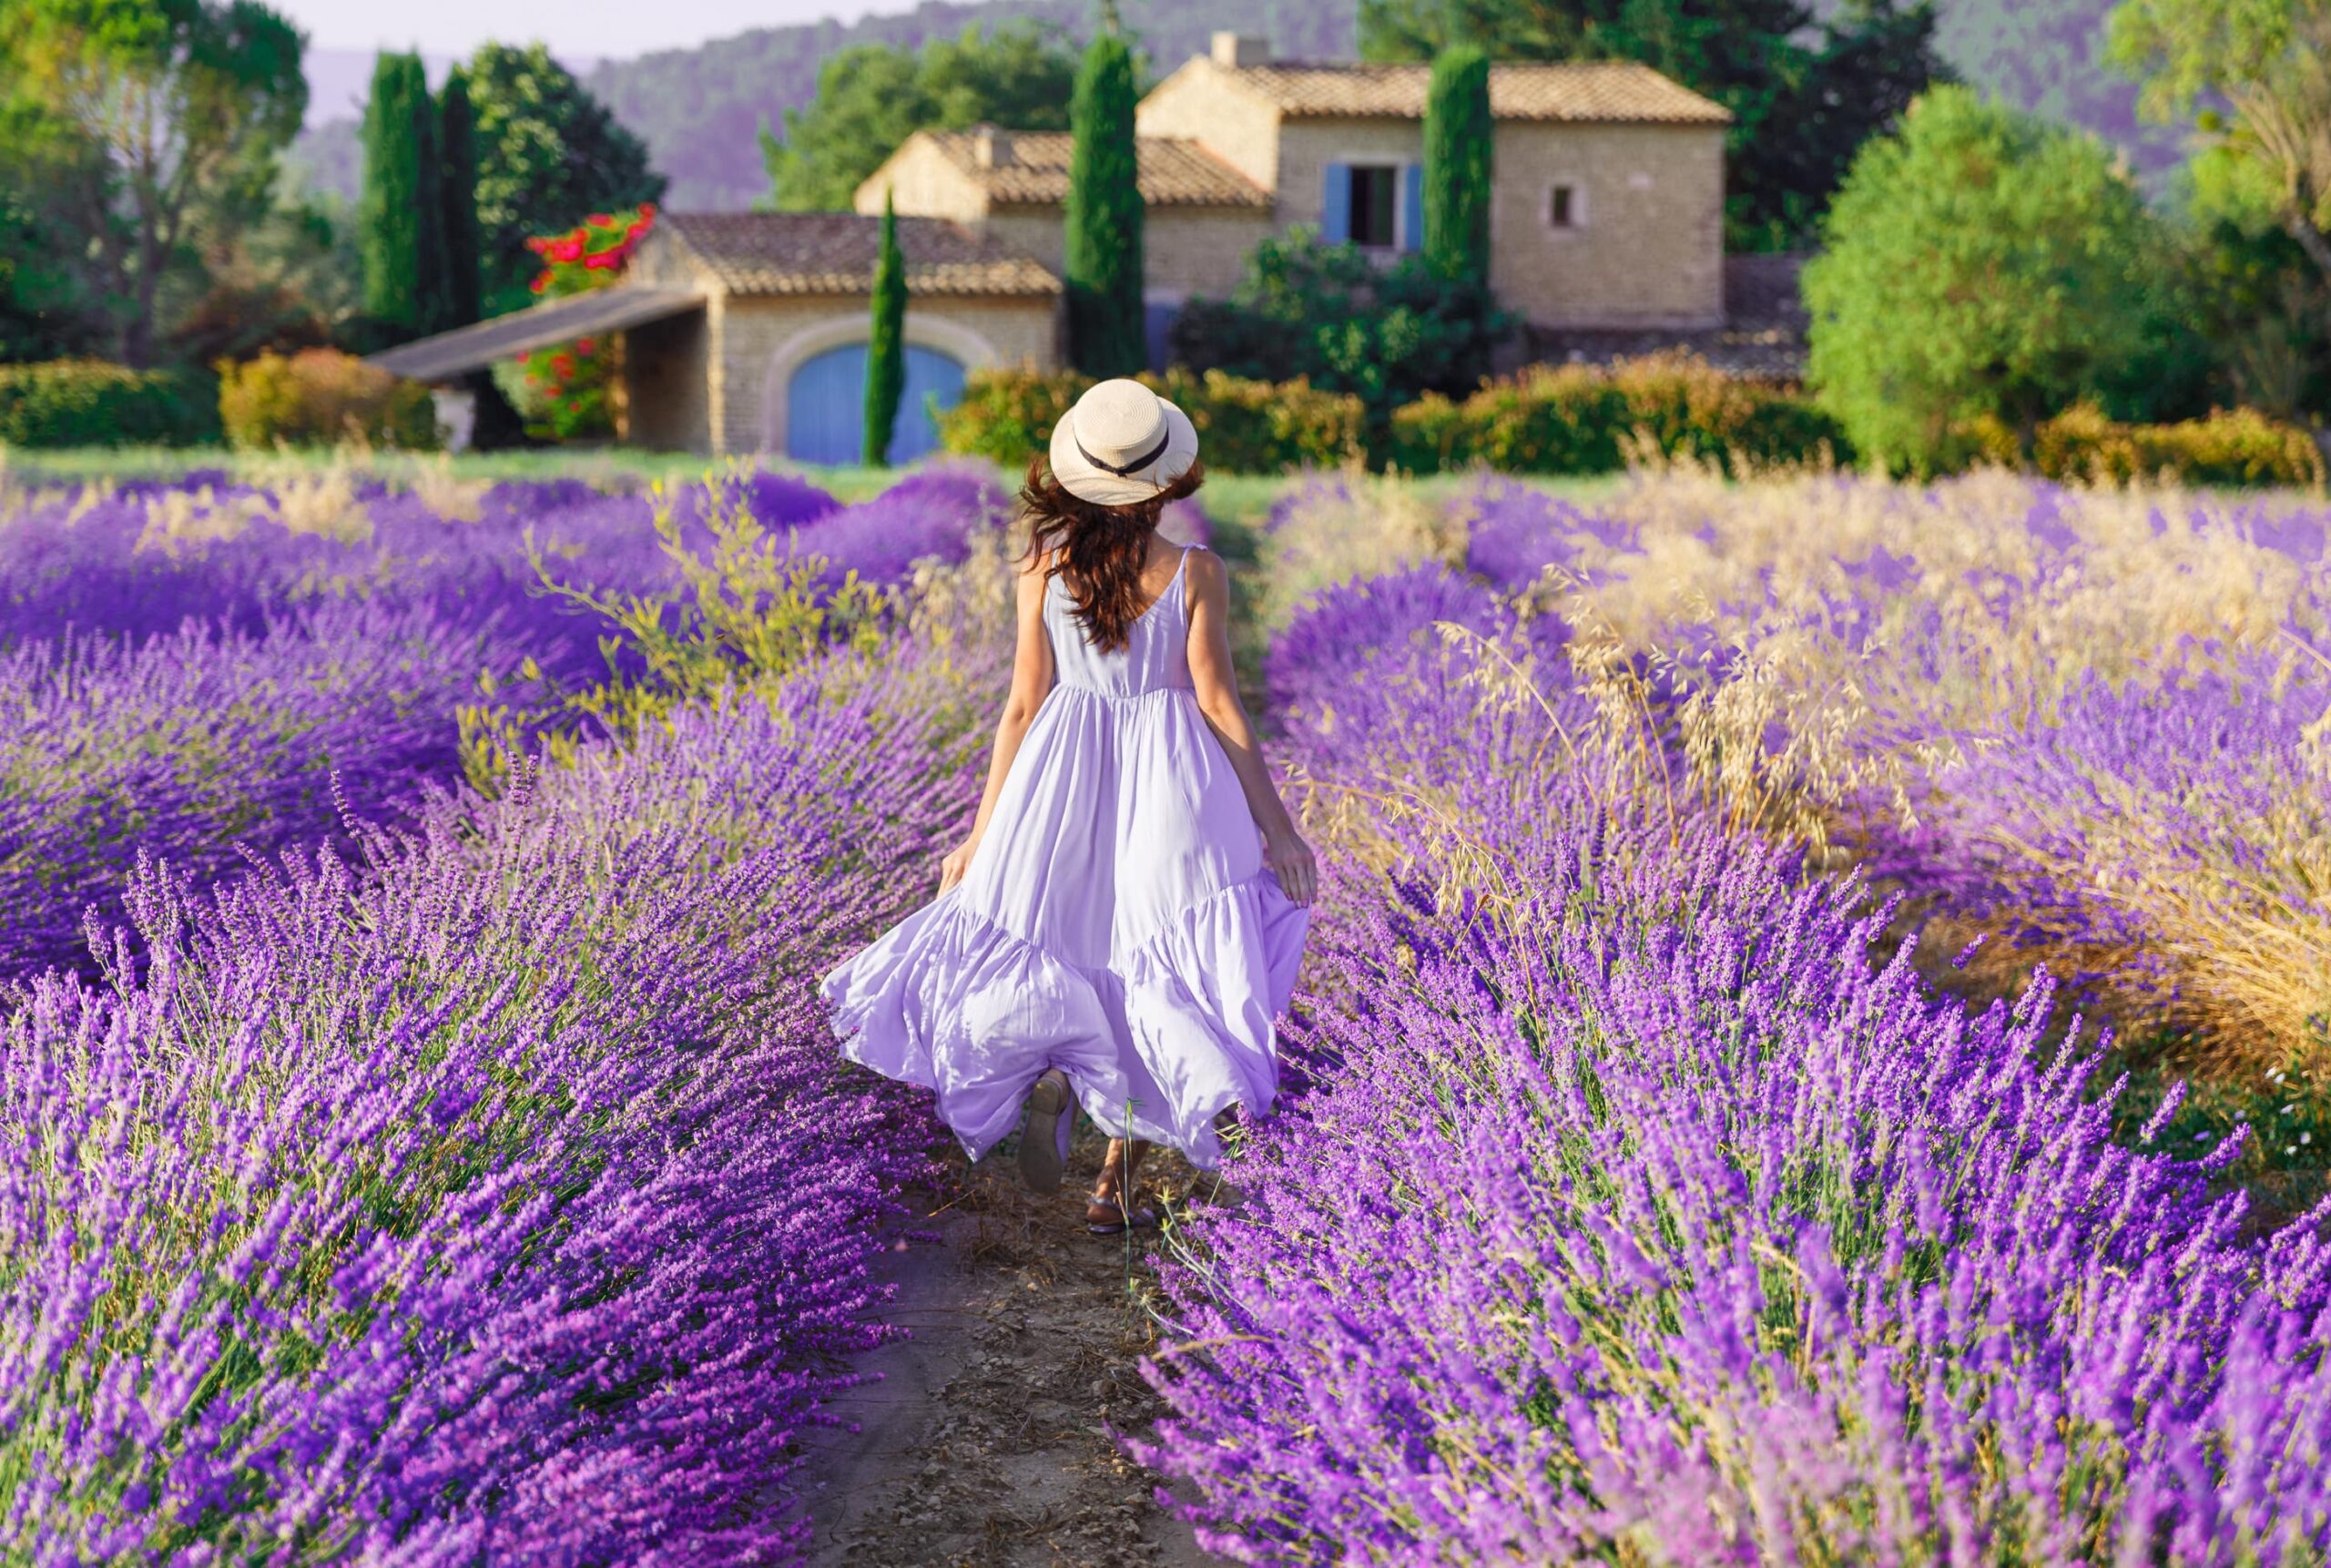 France | Smartferry | Provence France. Charming young woman in Blooming Lavender fields at background of beautiful traditional French Provencal house. scaled